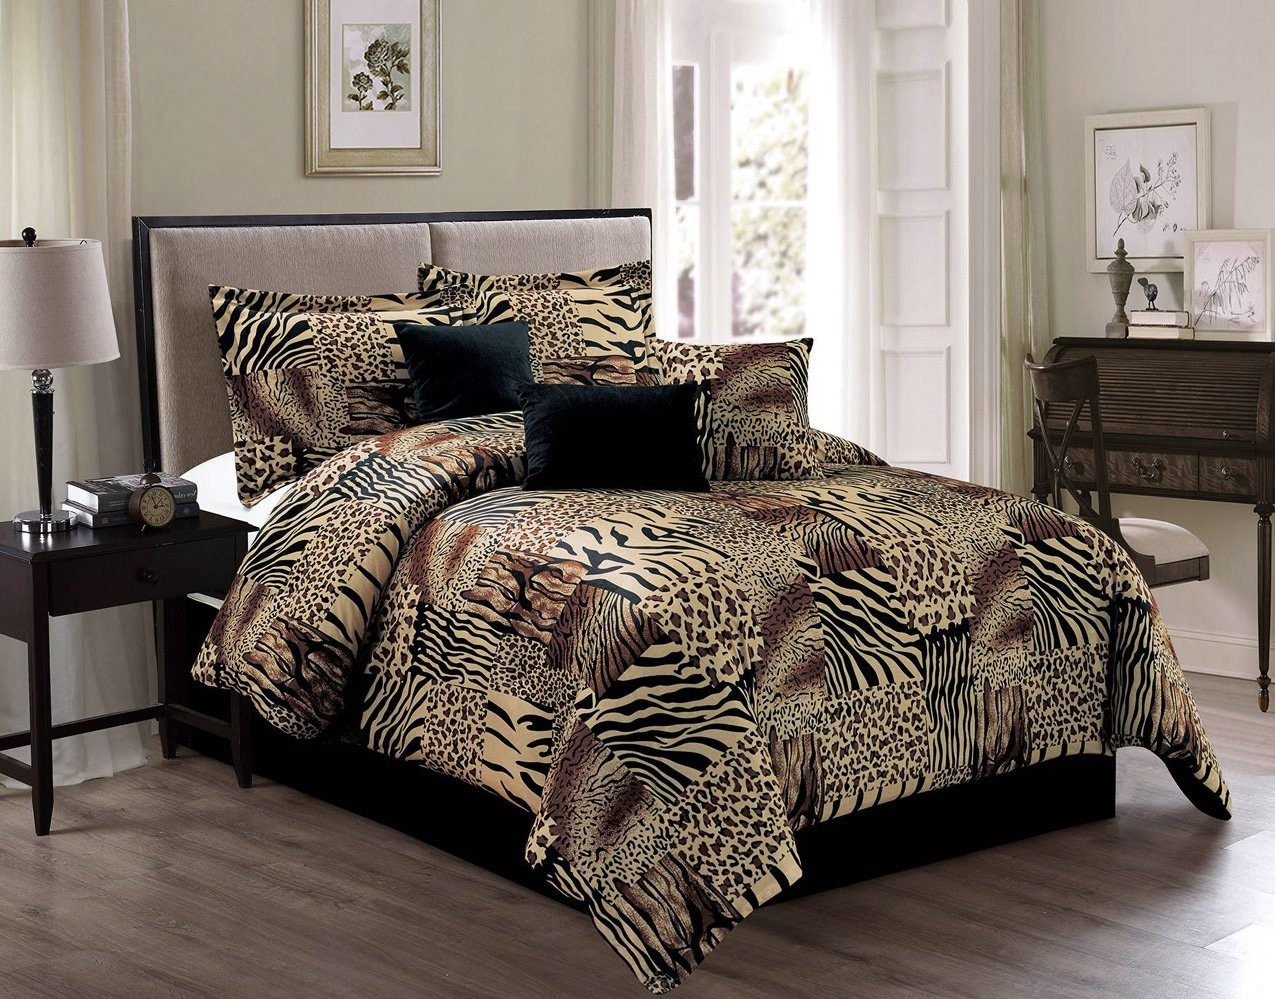 Brown bedding sets for bedroom ease bedding with style 1